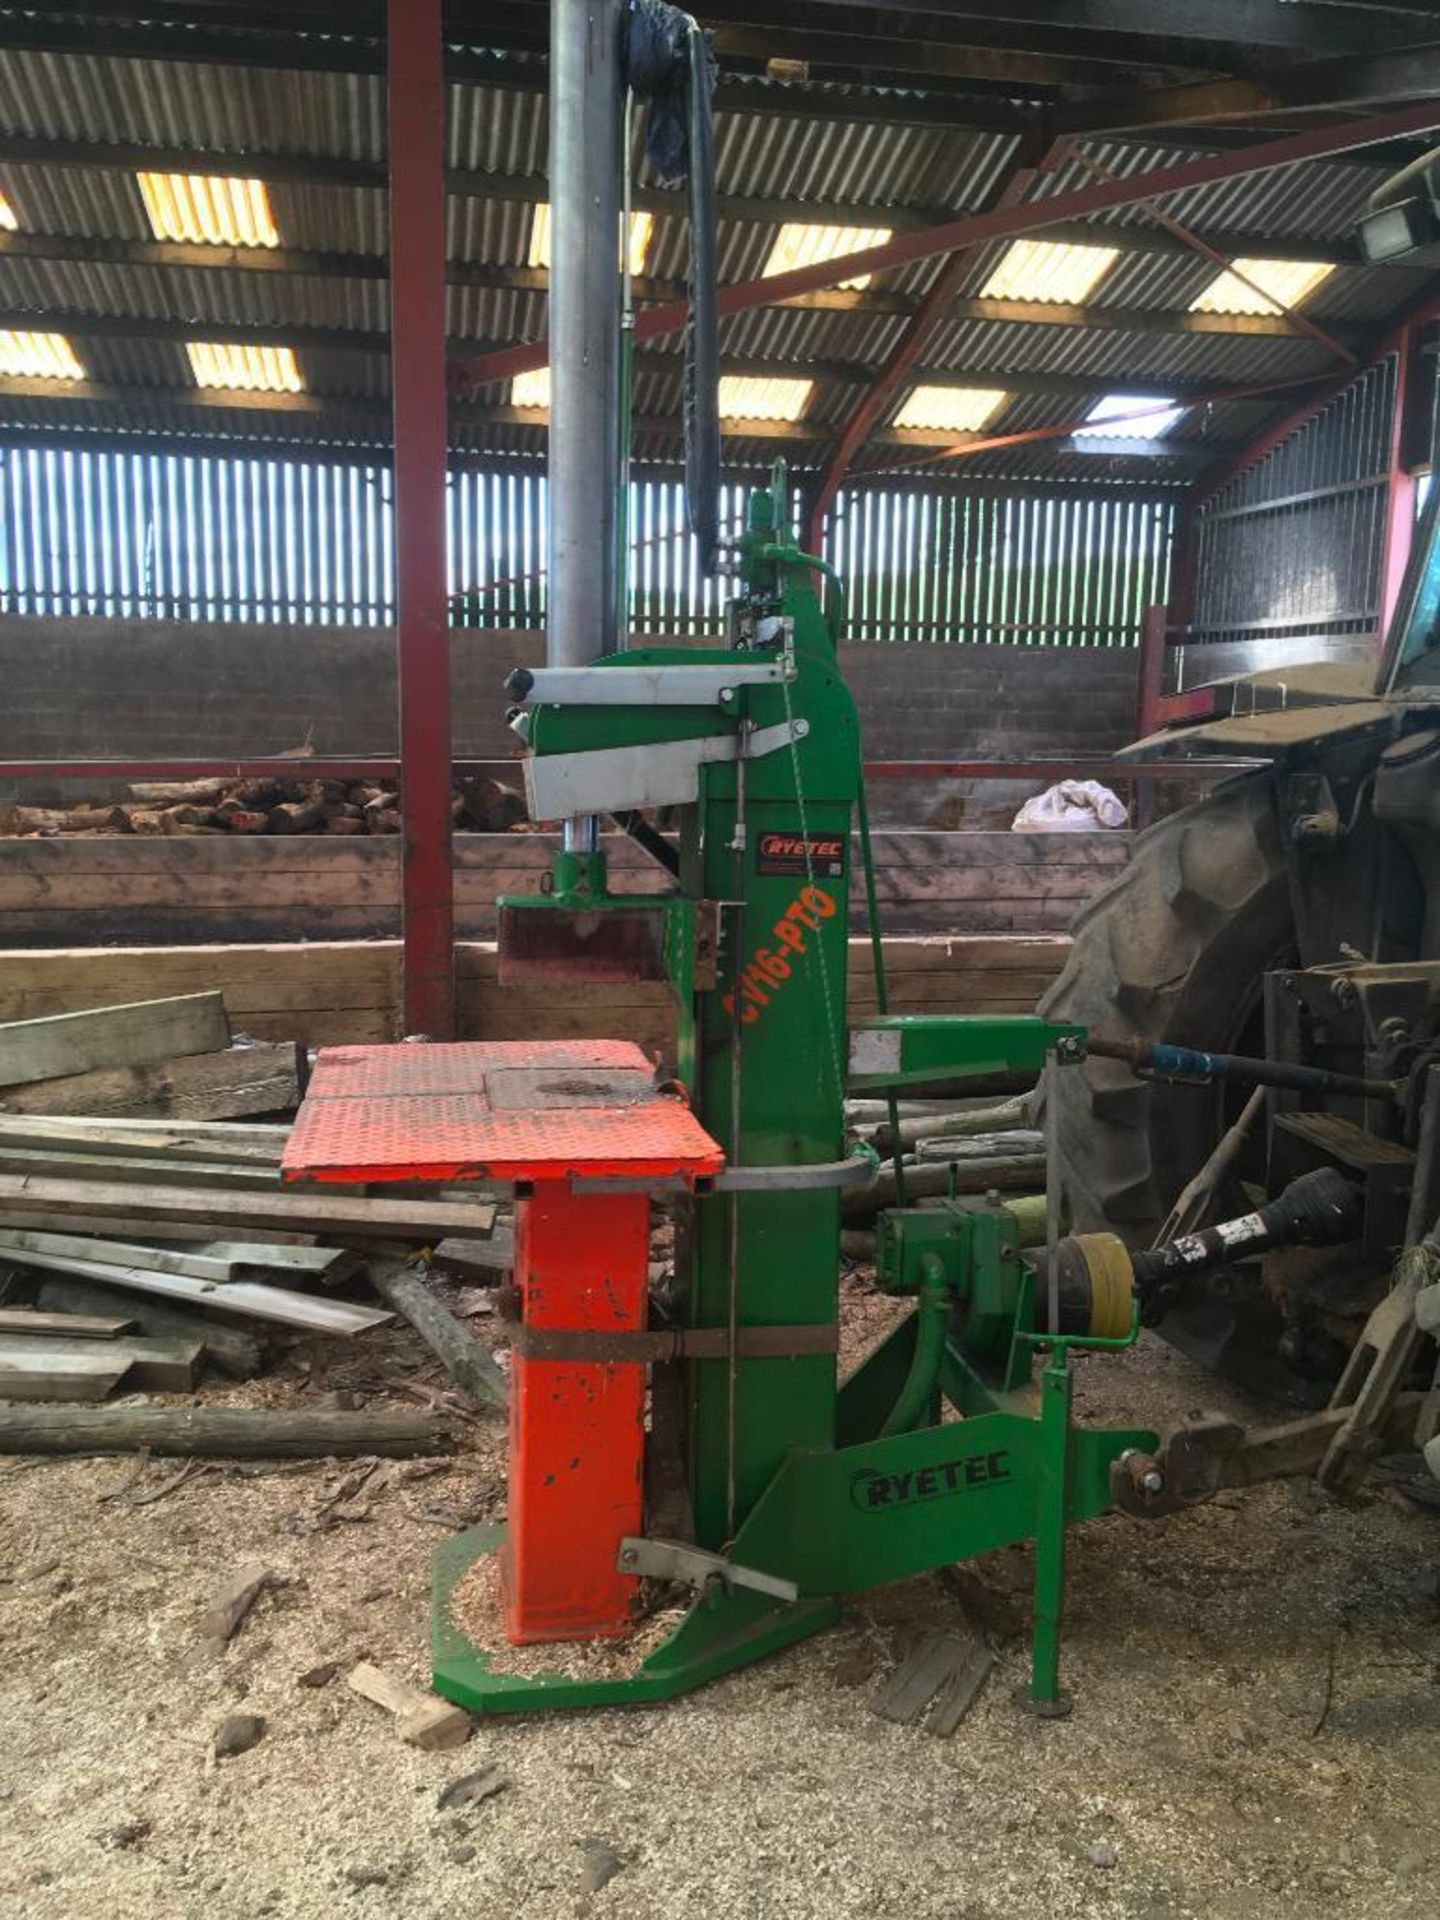 2014 Ryetec CV16-PTO pto driven log splitter, c/w safety features. Serial No: 0162414. Manual in off - Image 4 of 6